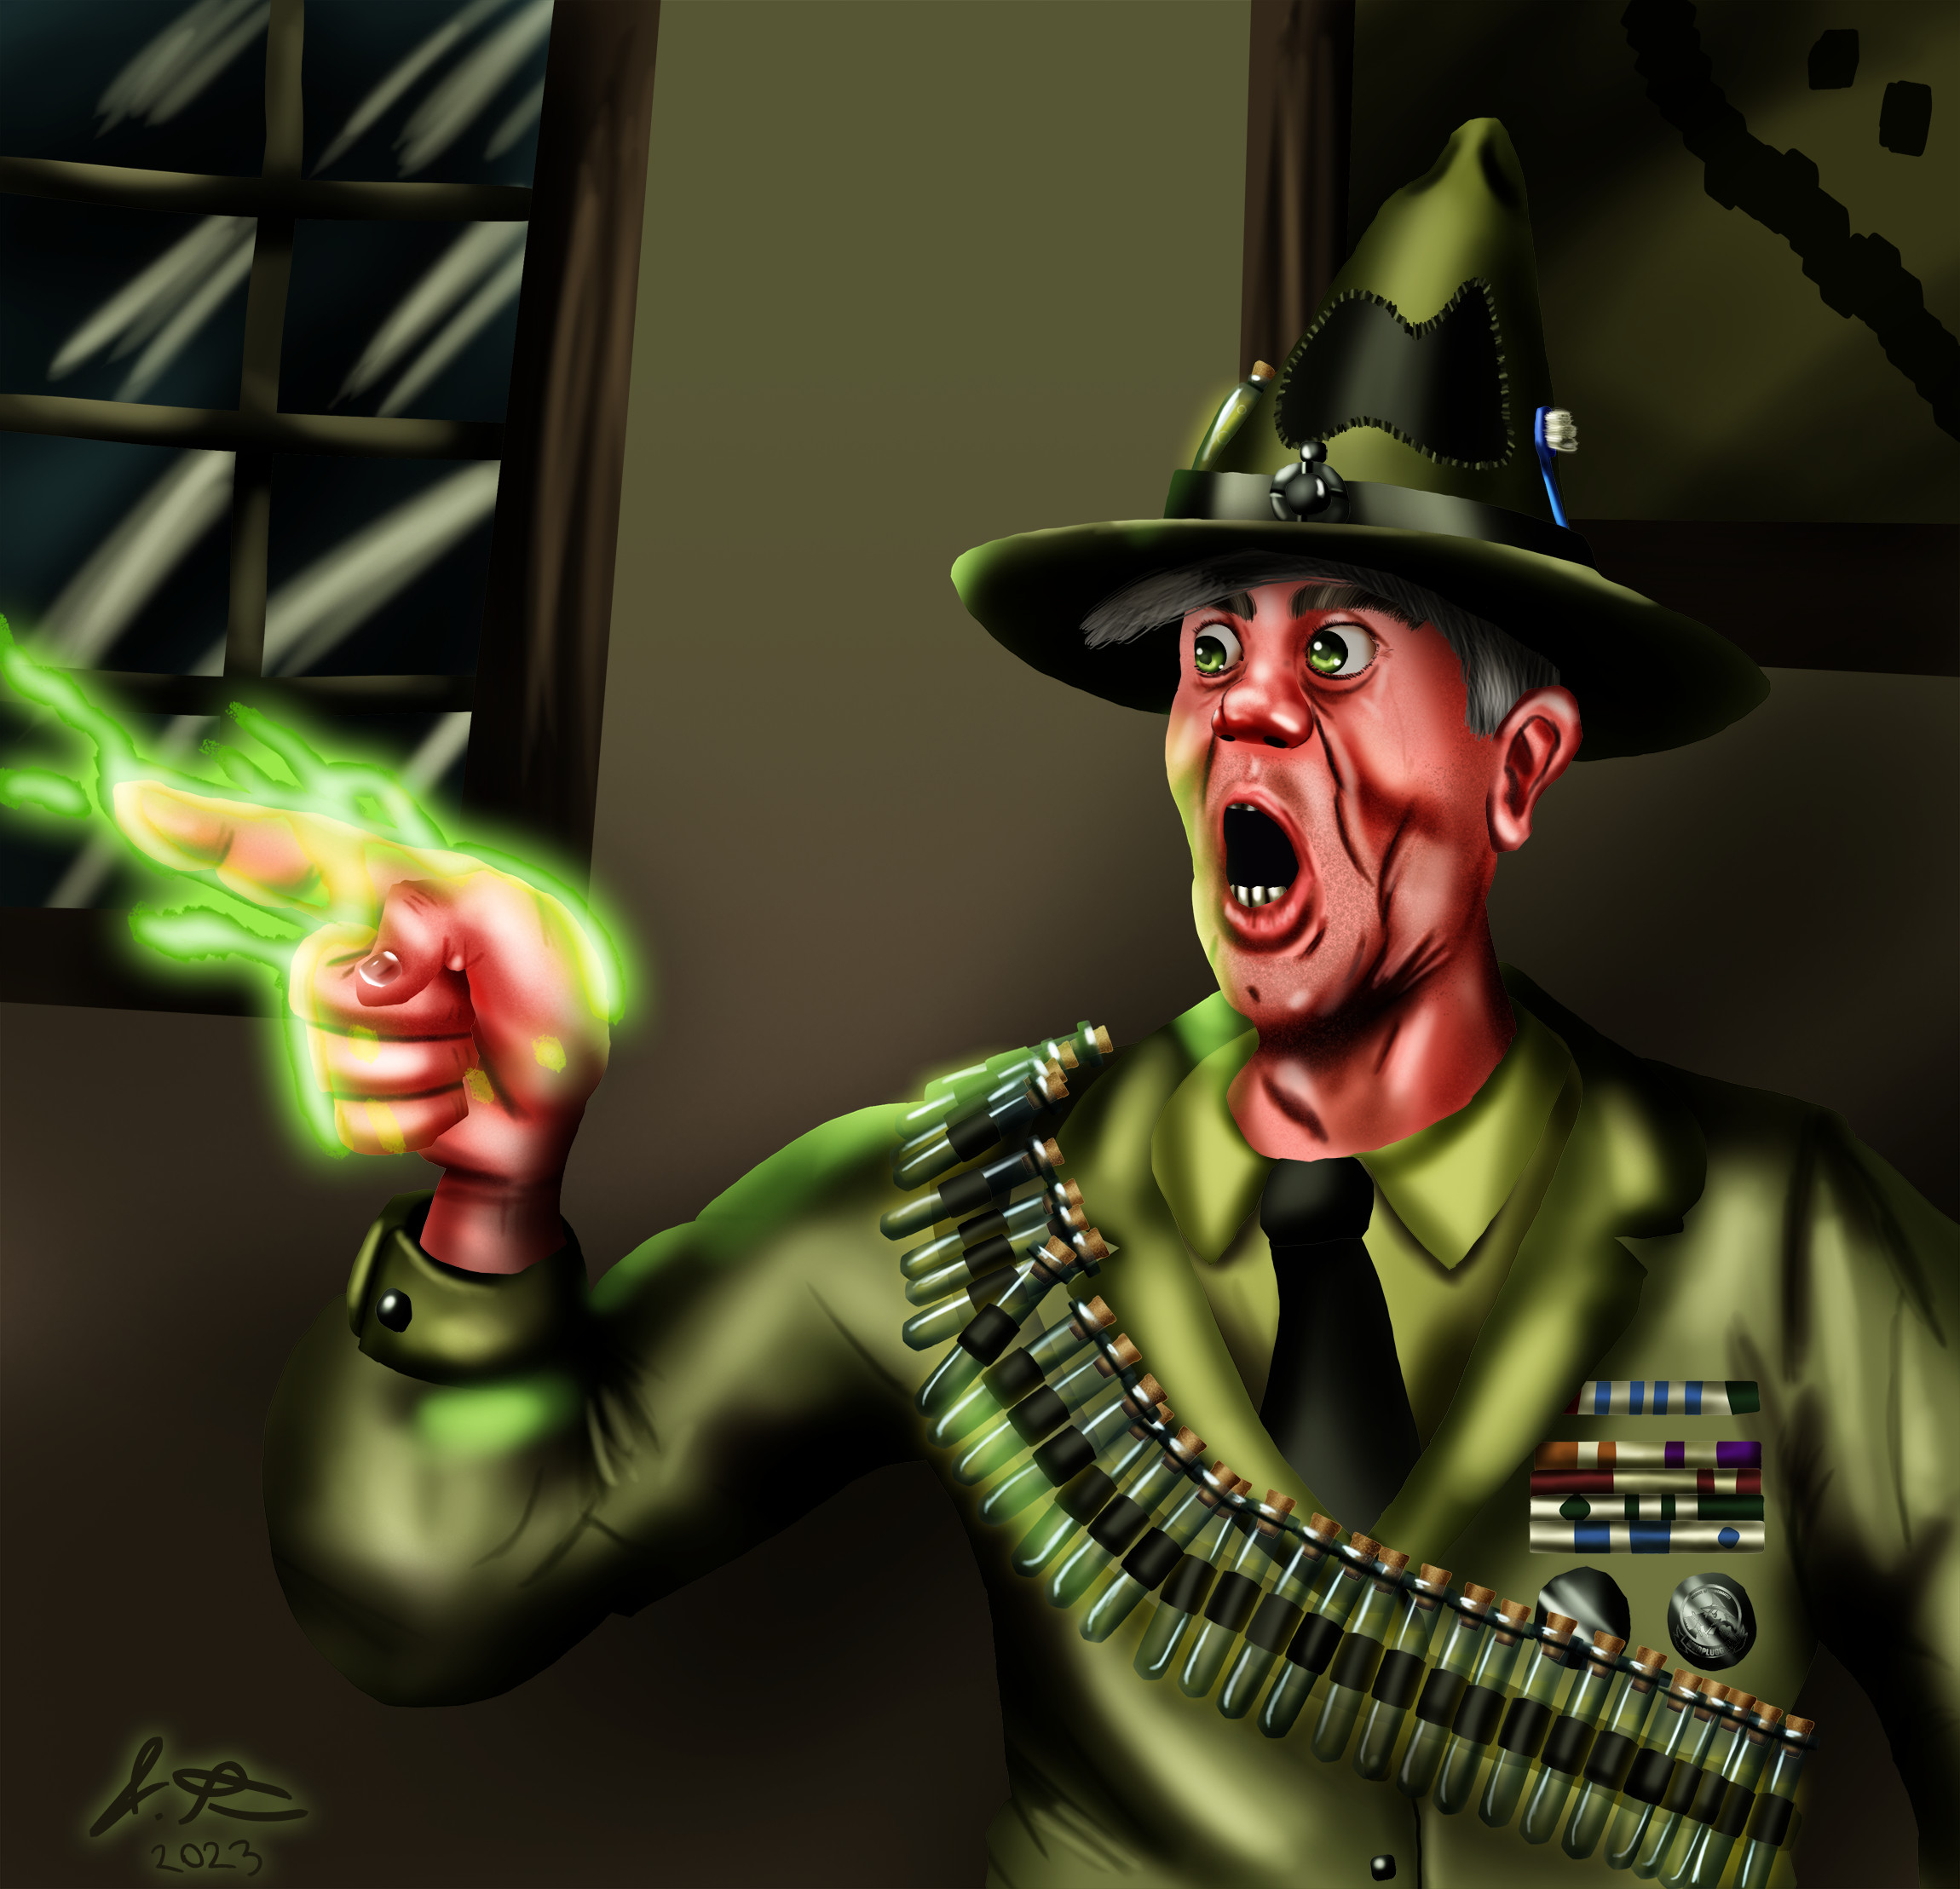 CHUCK ZULU! Lori and Ipsy's Drill Instructor casting a spell. Mostly based off R. Lee Ermey because he was the main inspiration behind CHUCK'S! character.